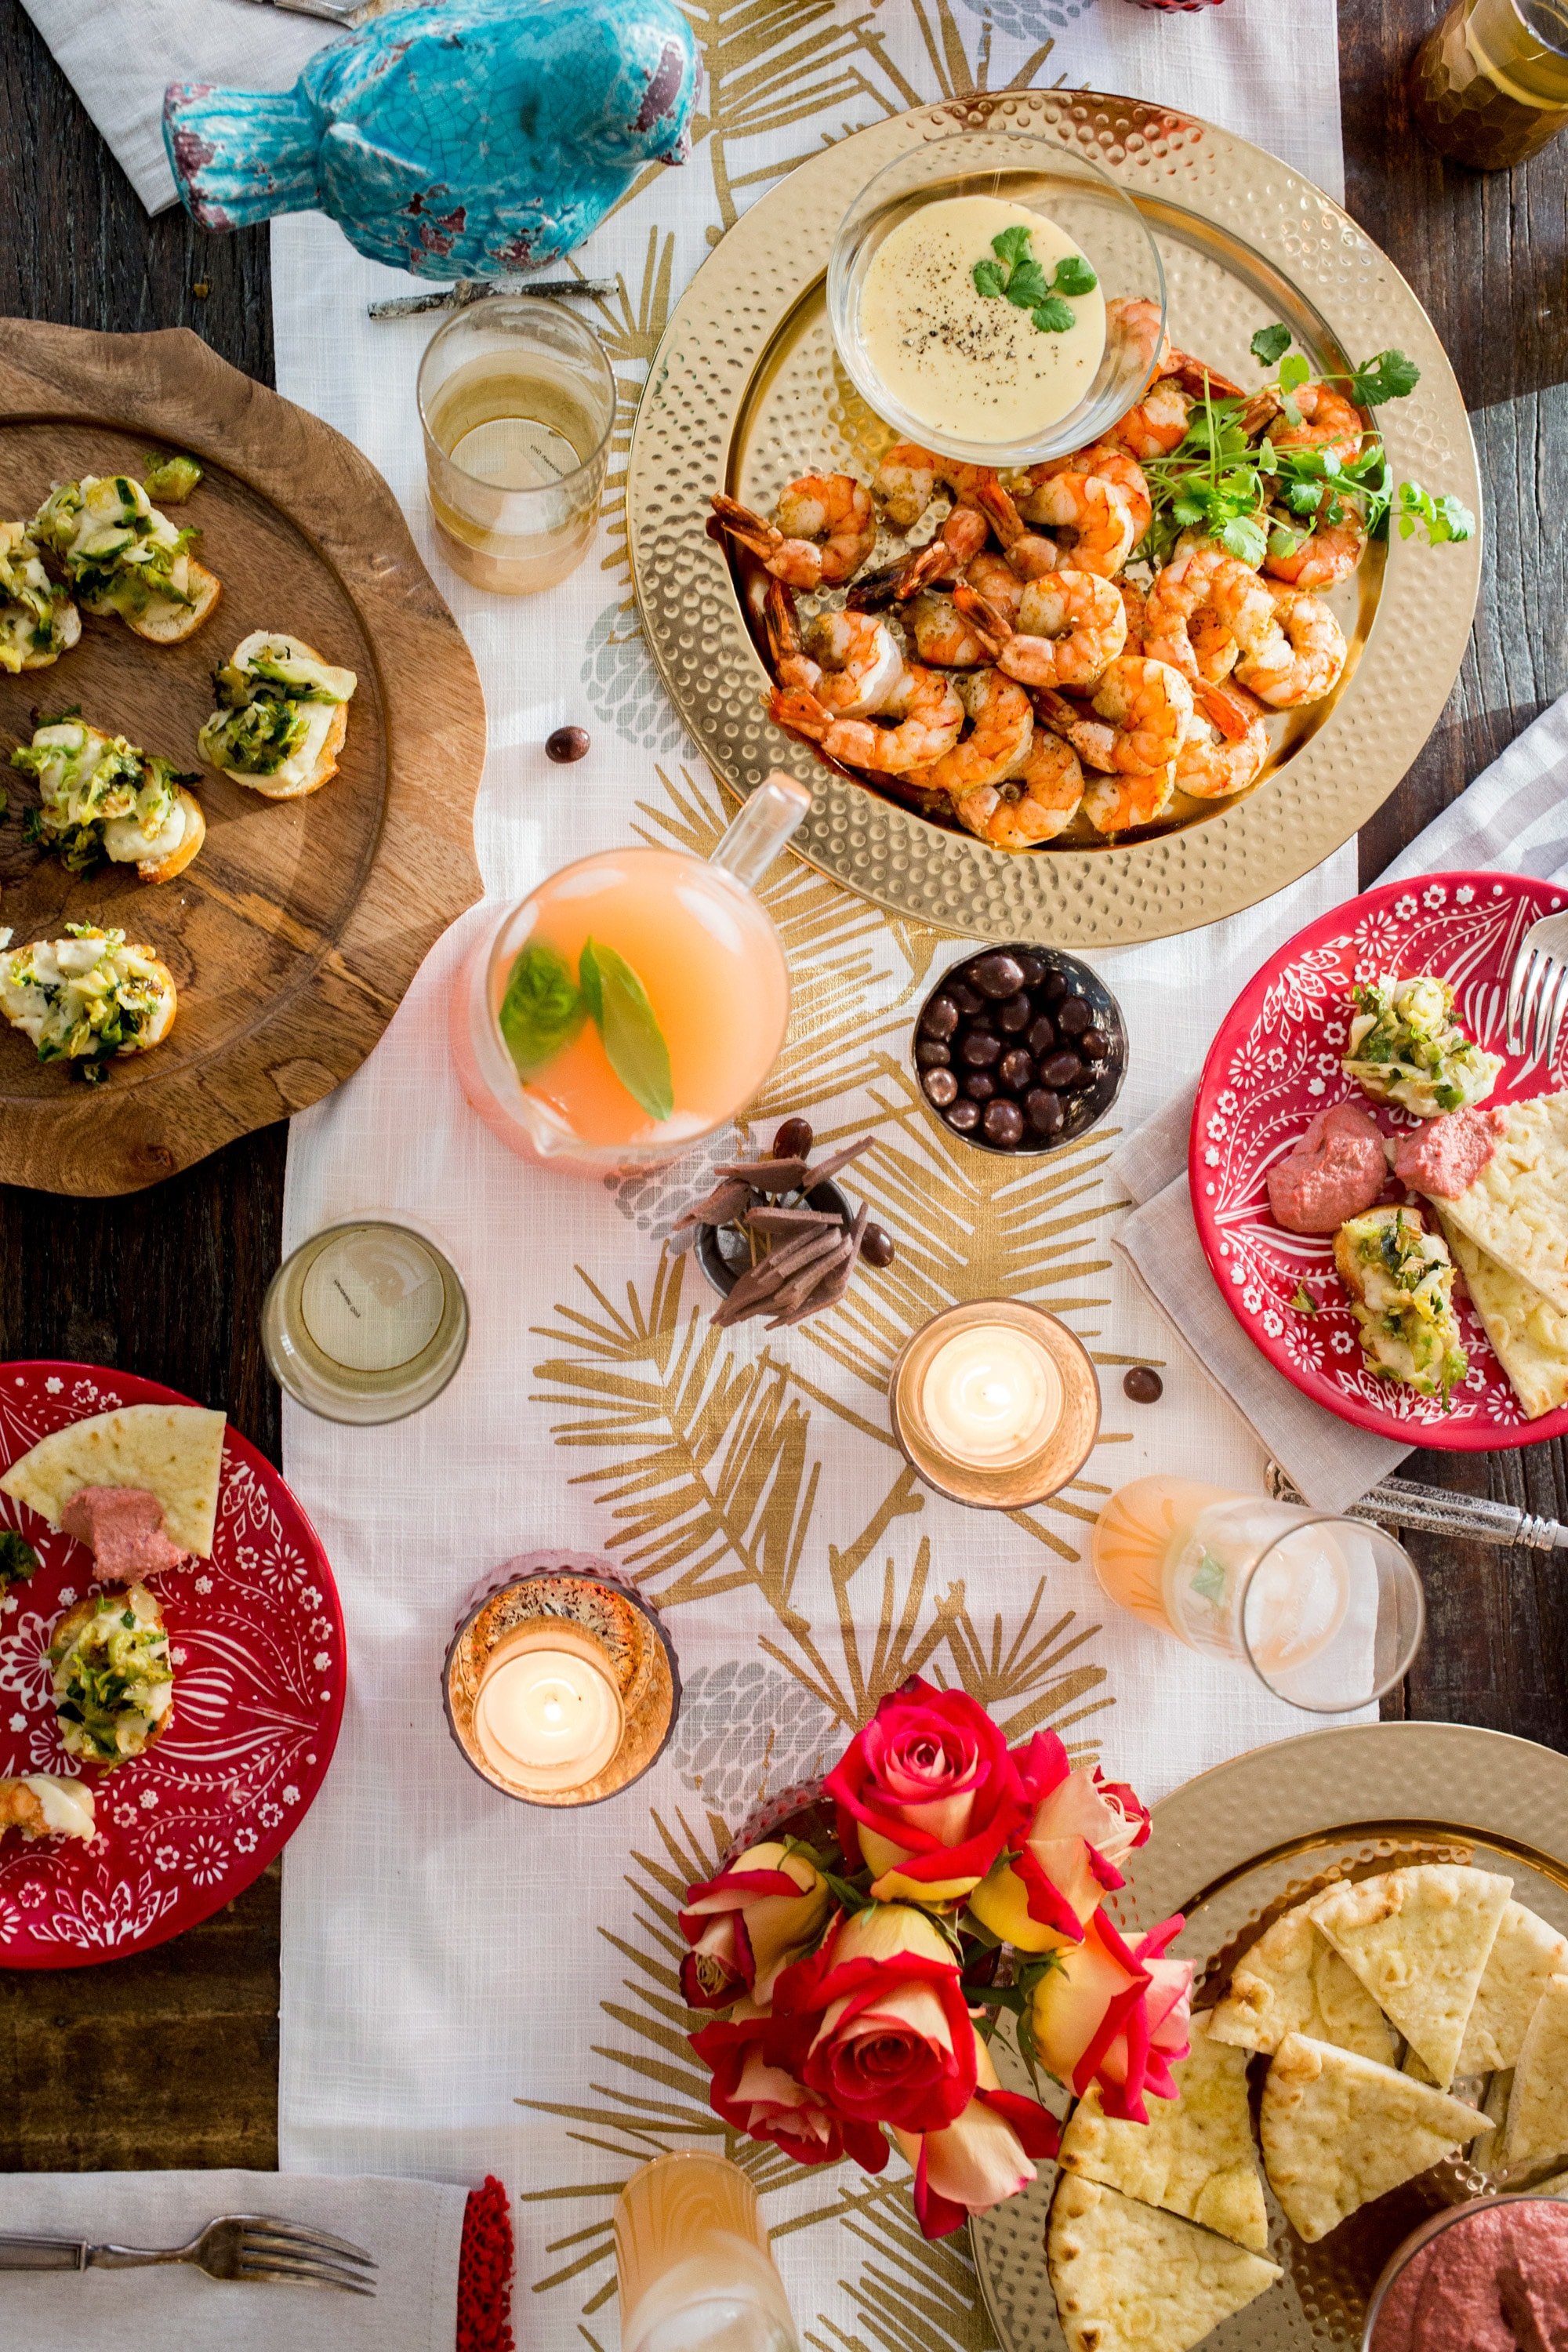 Shrimp dish, cocktails, and other foods and drinks on a holiday table.